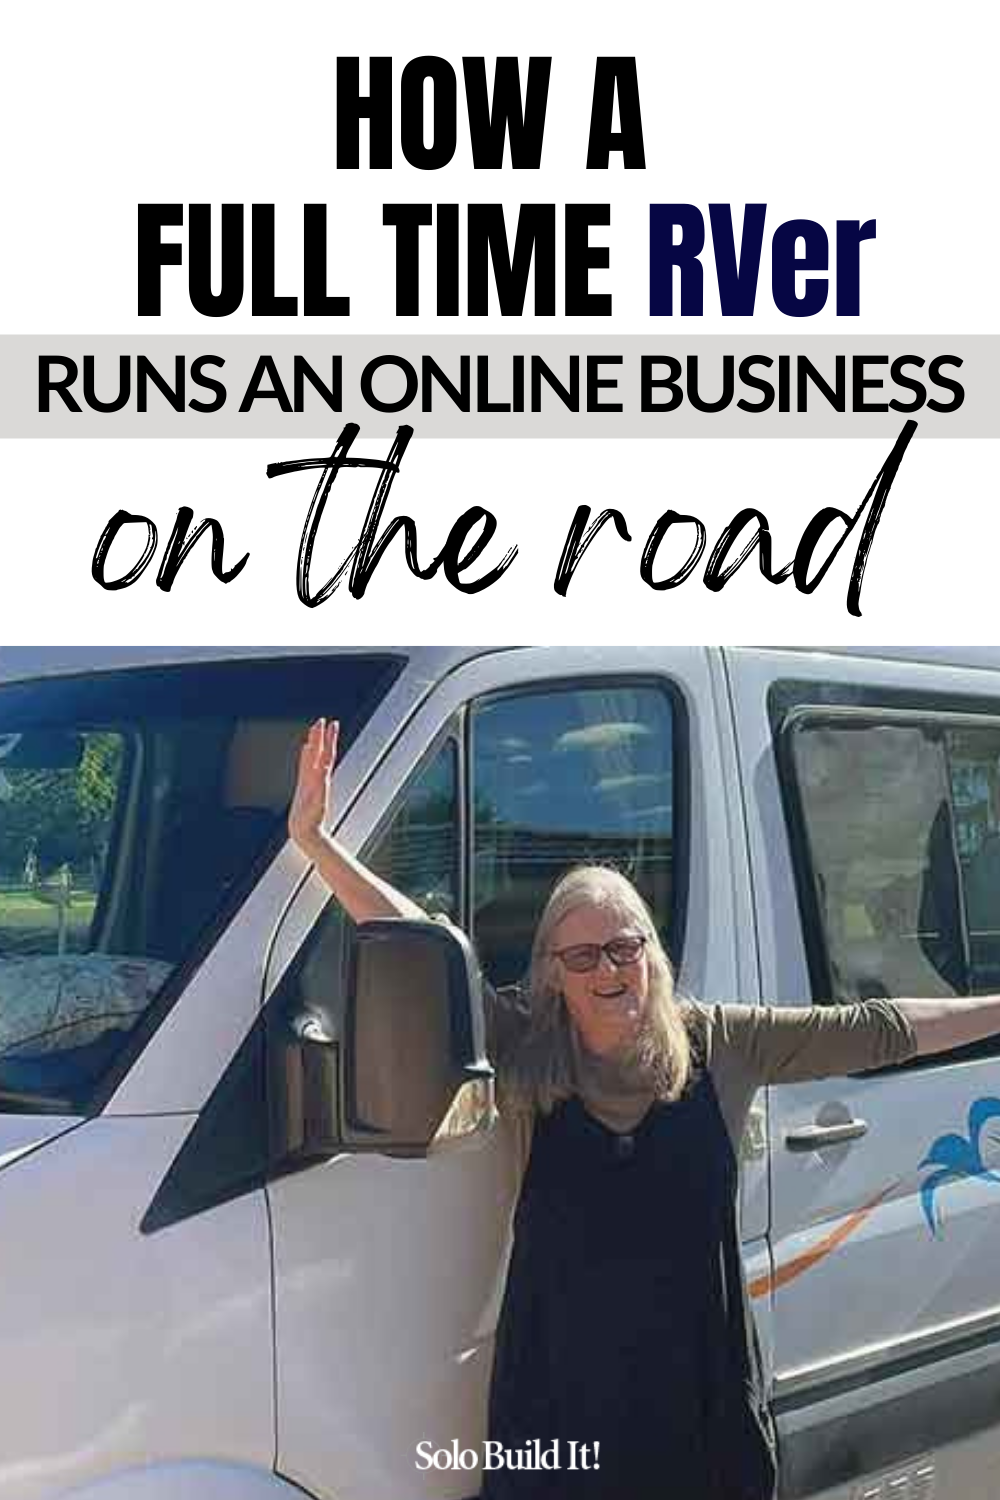 How to Run an Online Business From Your Van or RV